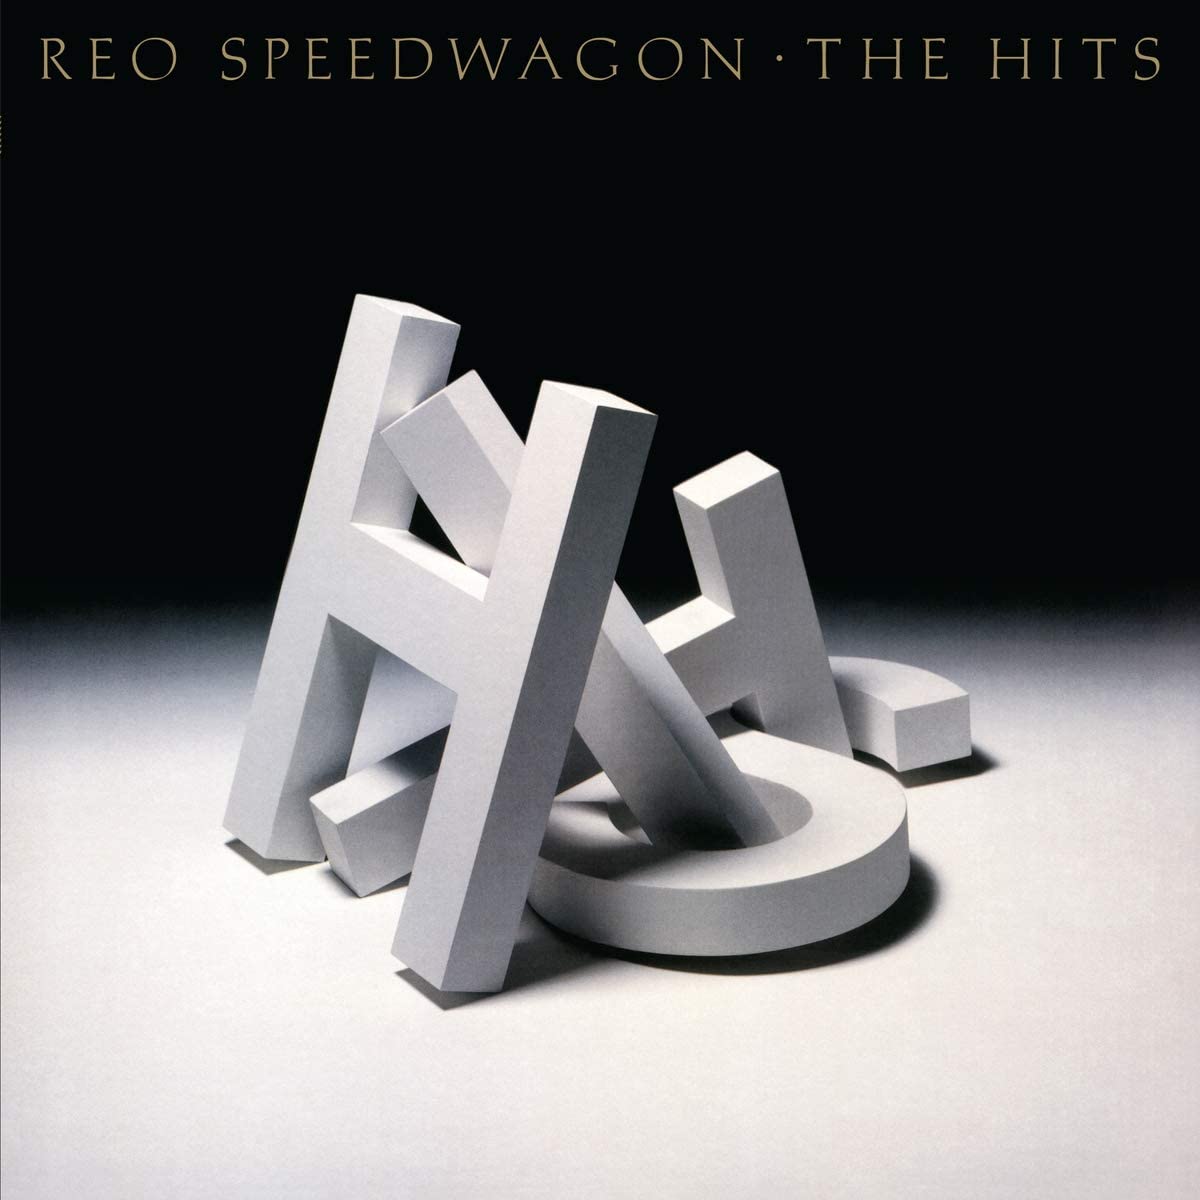 Compilation by REO Speedwagon, originally made available in 1988. The 12-song album on Vinyl is full of hits and fan favourites, including the two worldwide smash hit singles 'Cant Fight This Feeling' and 'Keep On Loving You'.